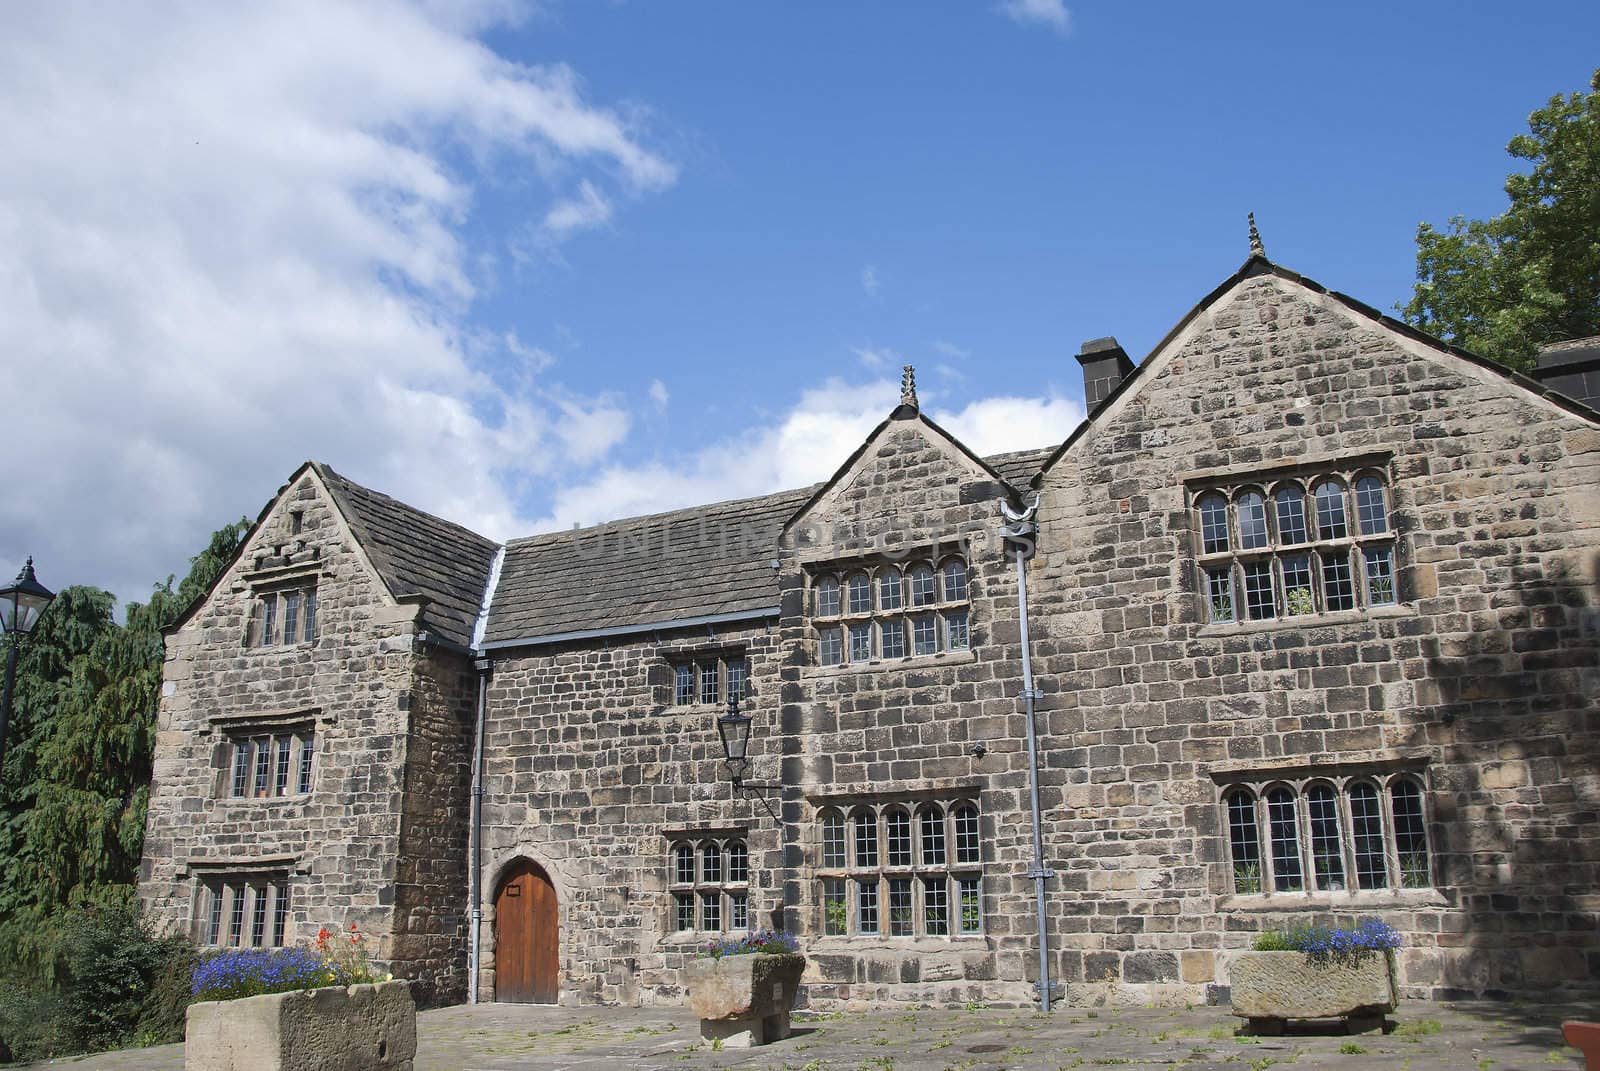 A Fifteenth Century Stone Built Manor House in Yorkshire